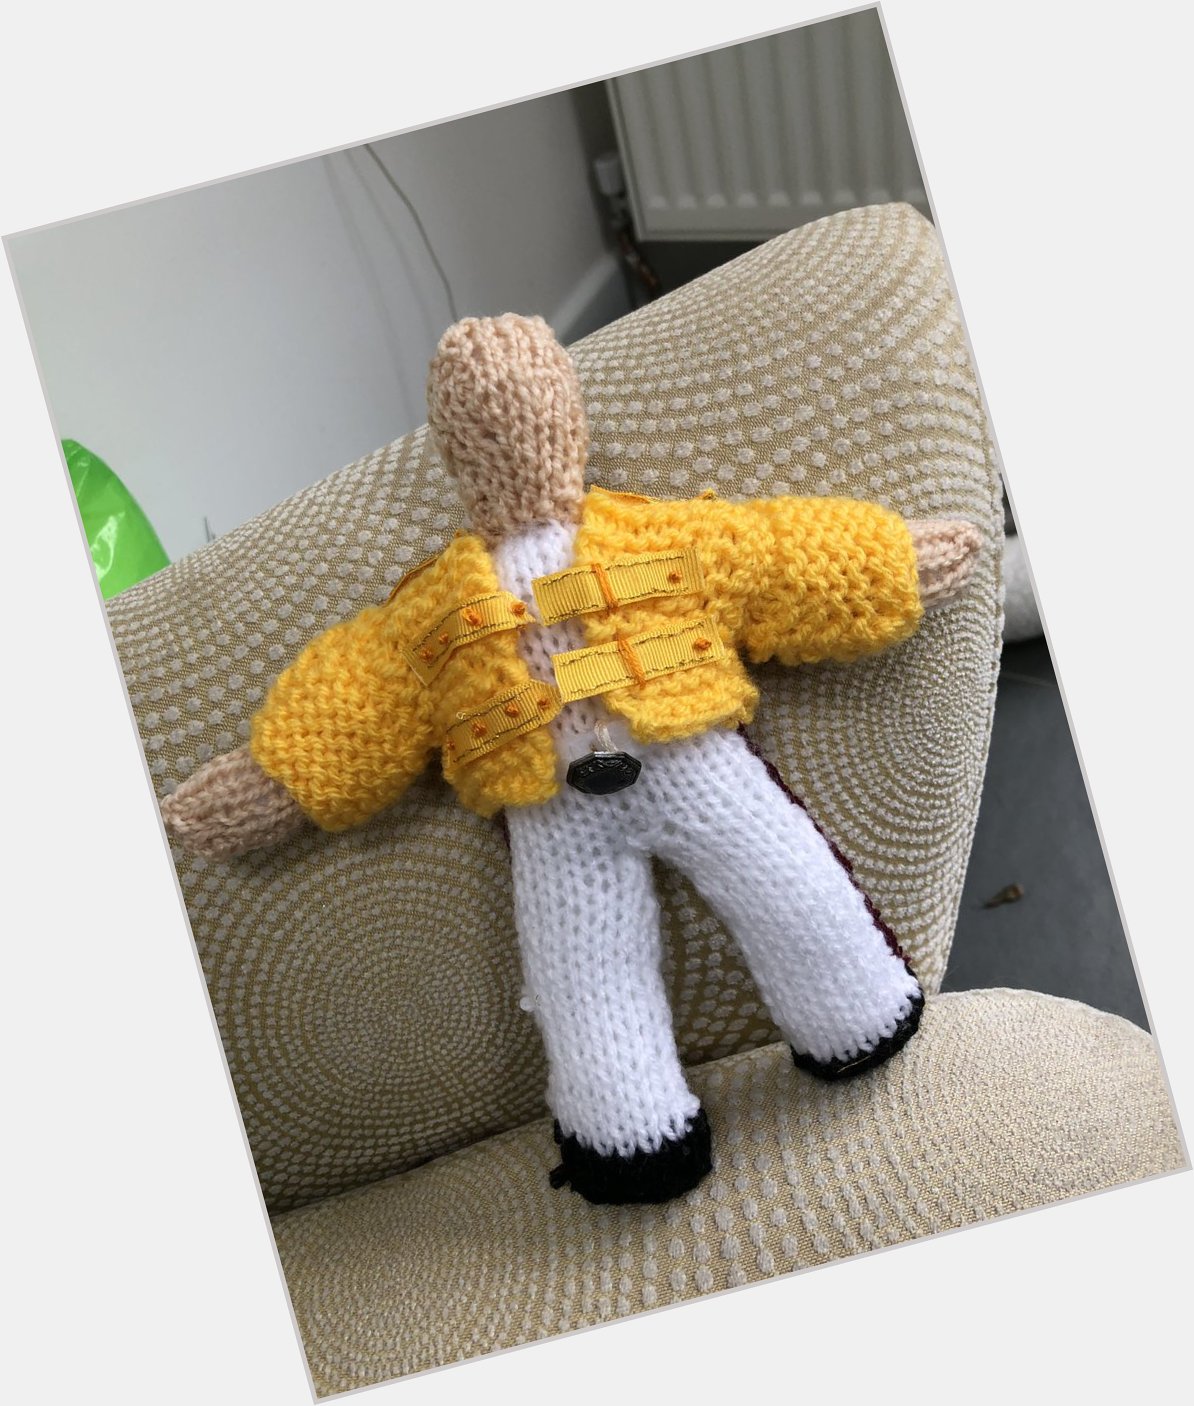 What s making me happy? Making a knitted Freddie Mercury for my mum s birthday! Progress so far! 